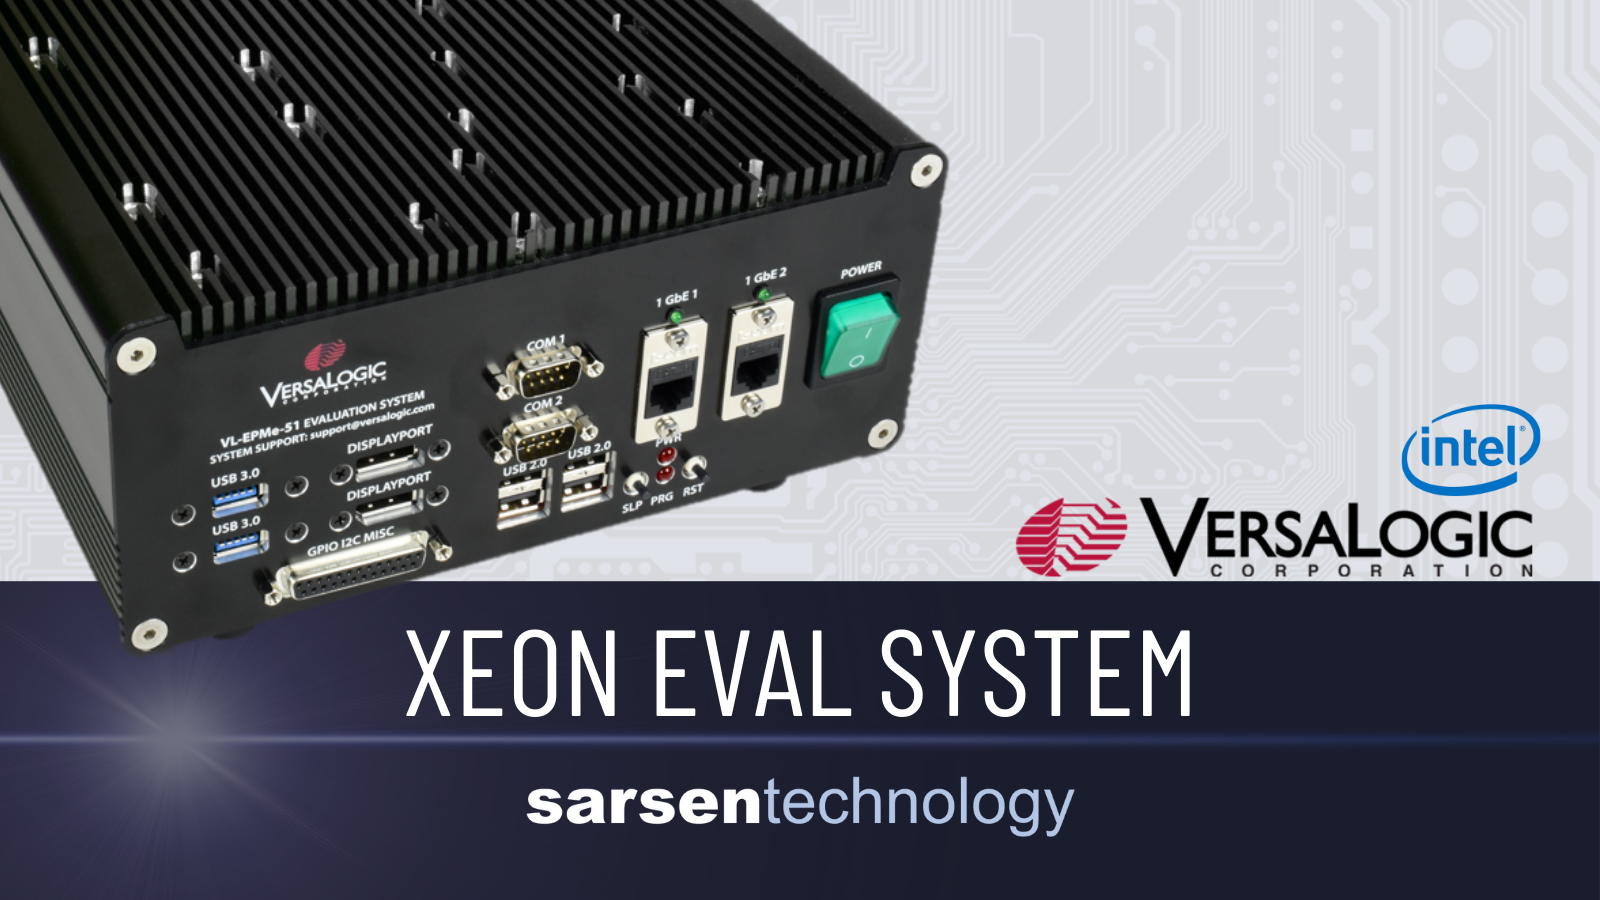  Xeon 6-core embedded computer evaluation system